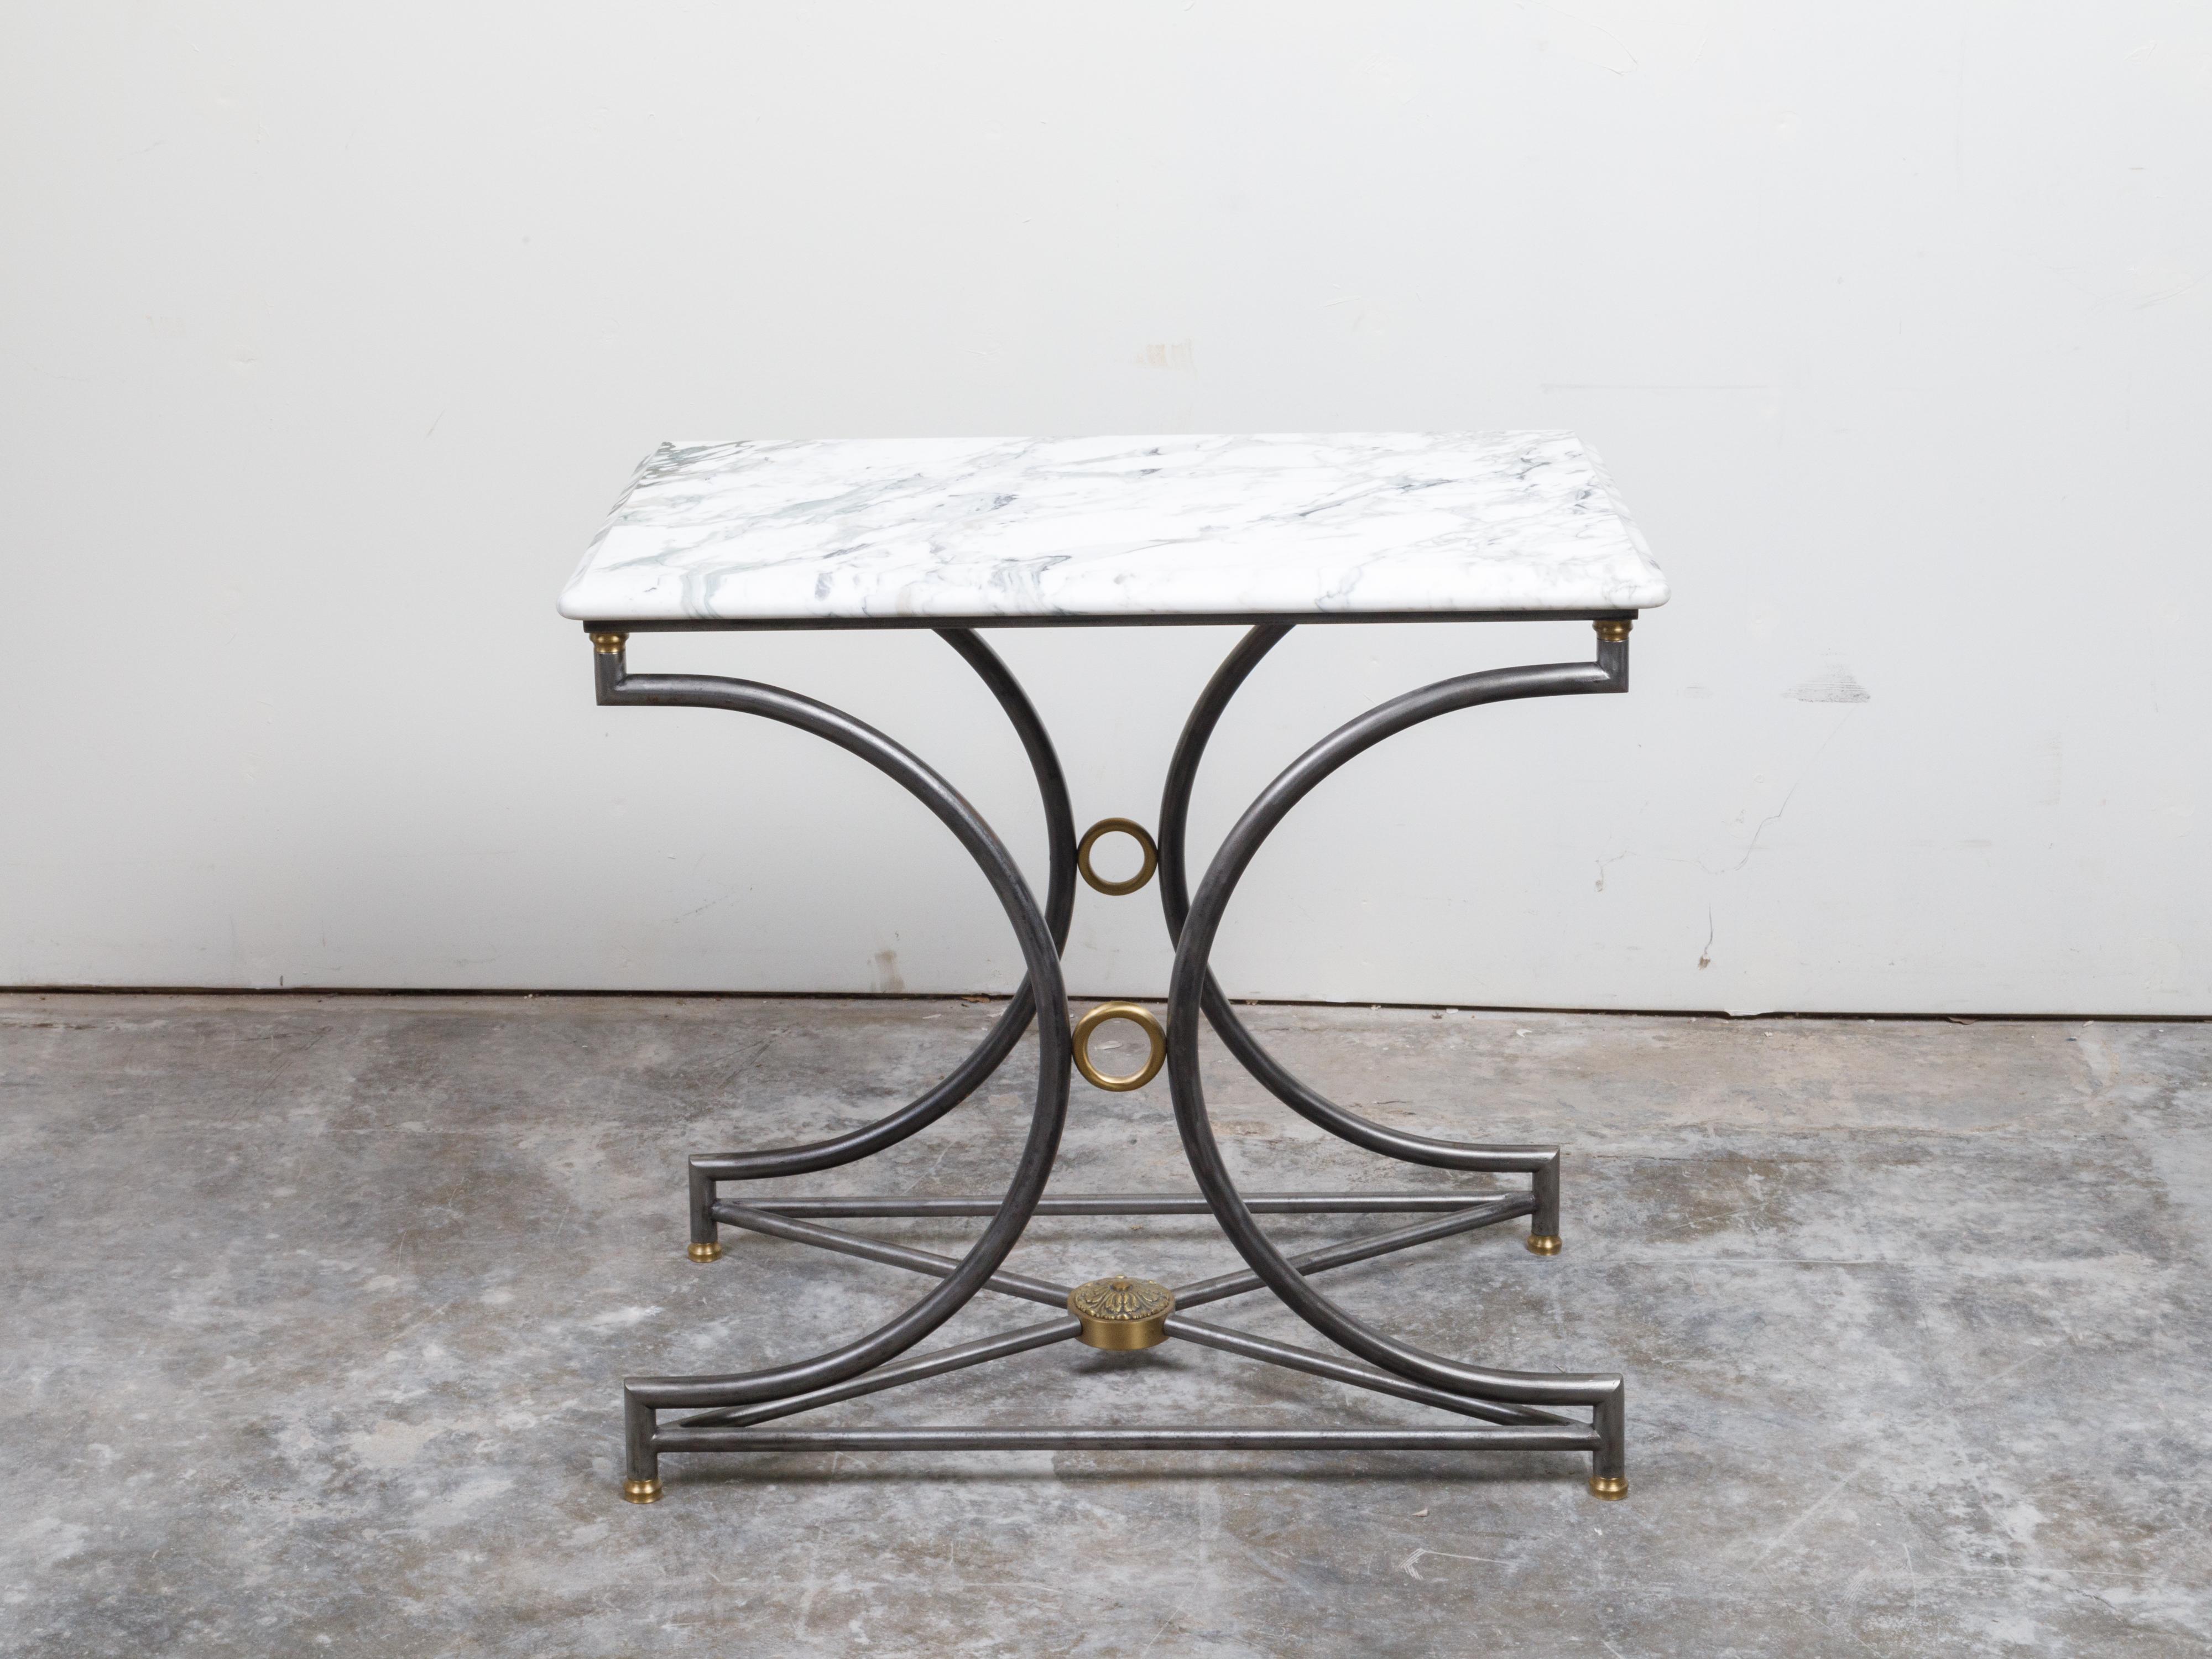 A French steel and bronze console table from the mid 20th century, with marble top and rosette medallion. Created in France during the midcentury period, this console table features a rectangular white veined marble top with rounded corners and